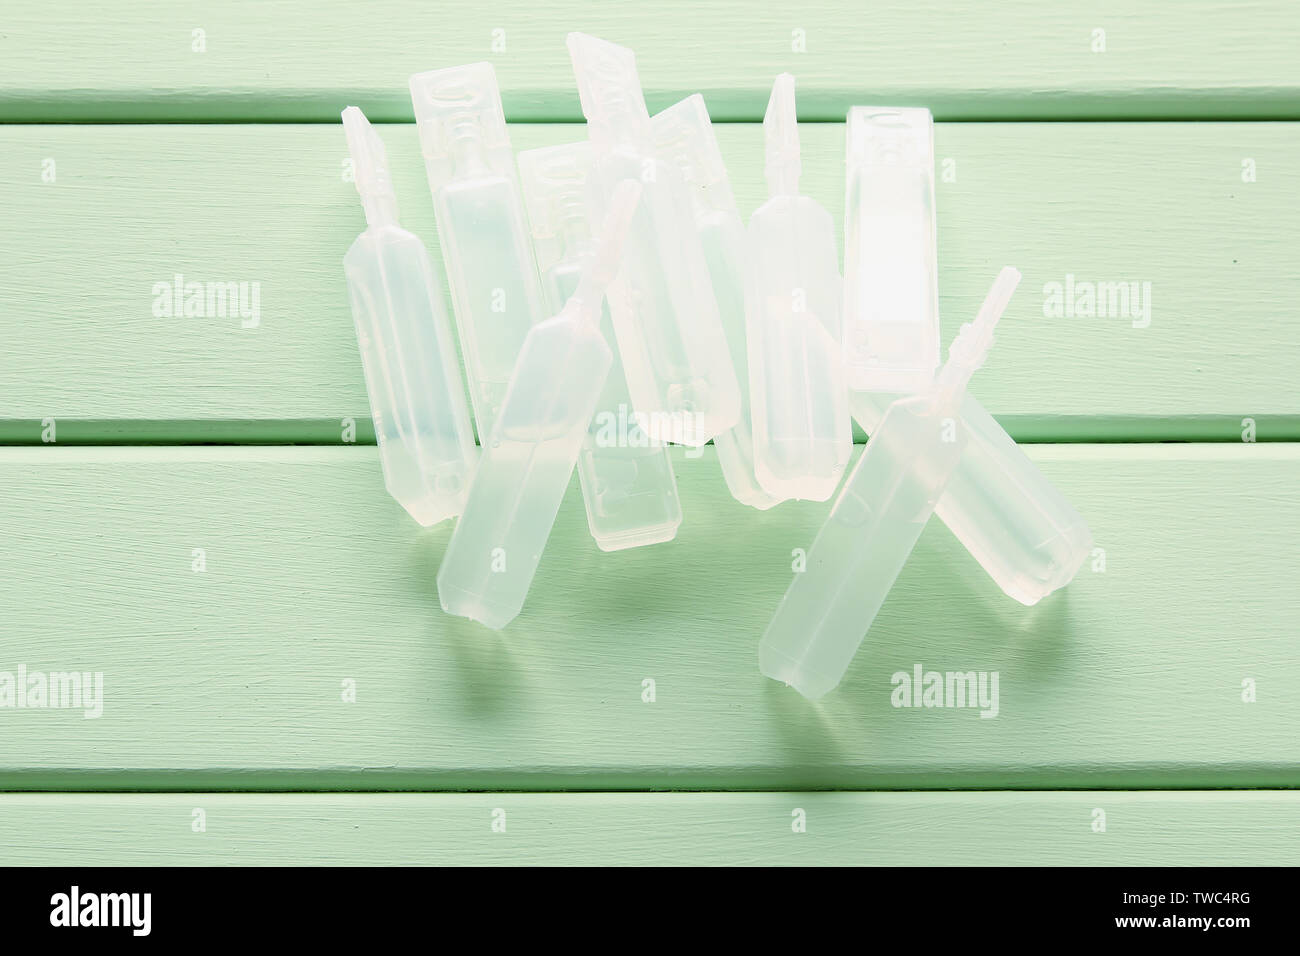 Vials of Saline Solution on Wooden Background Stock Photo